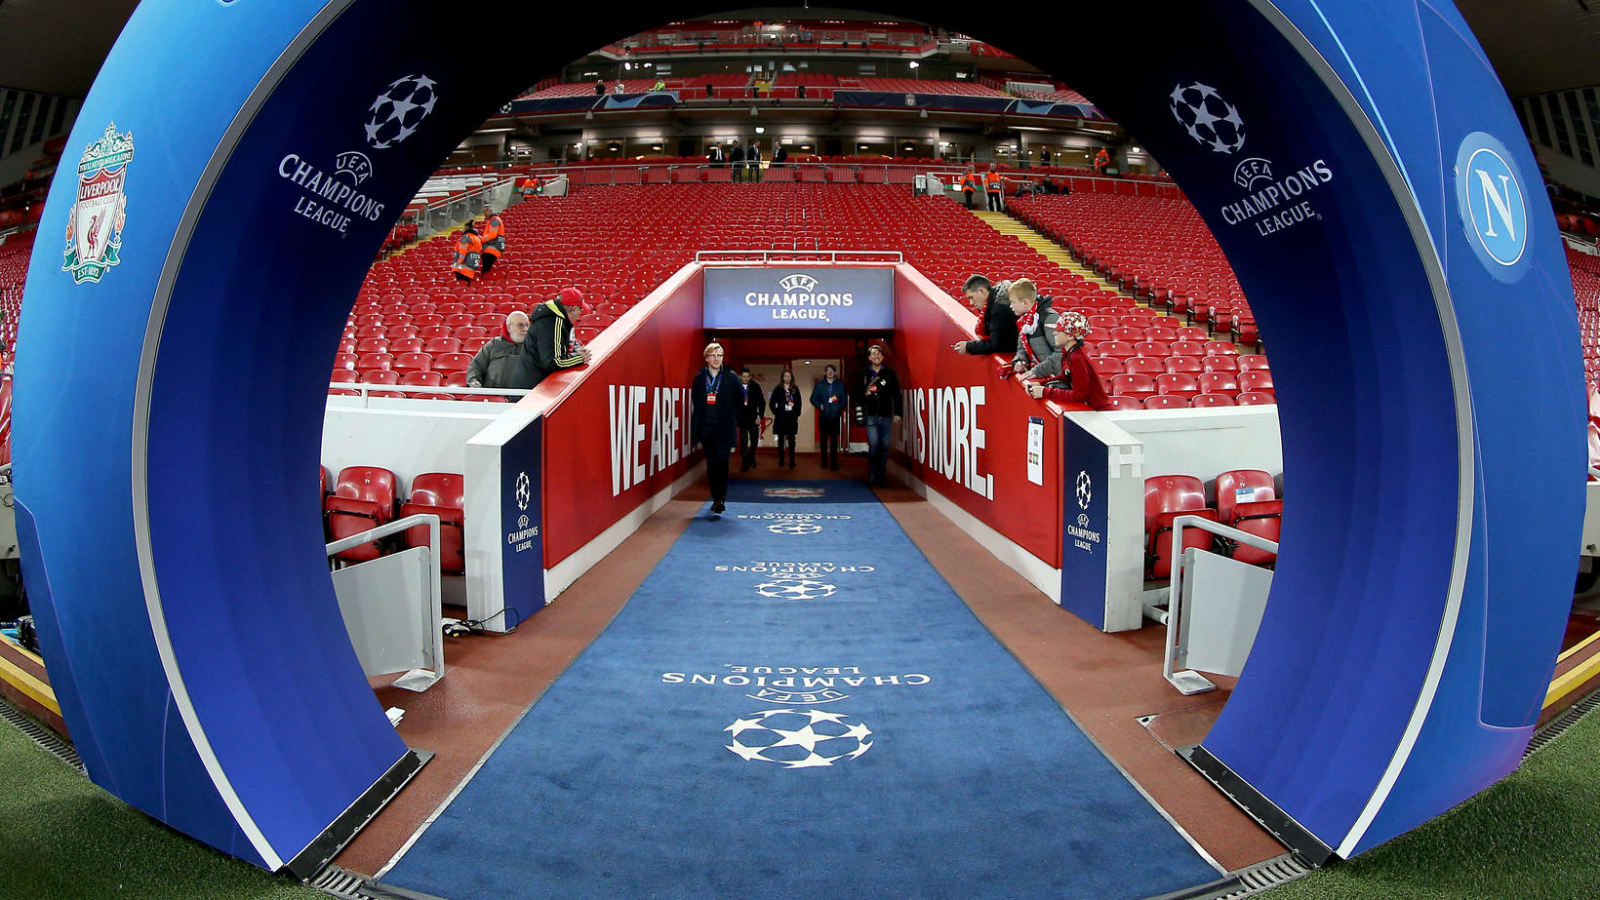 Report: Turner Sports drops Champions League before 2020 Final 